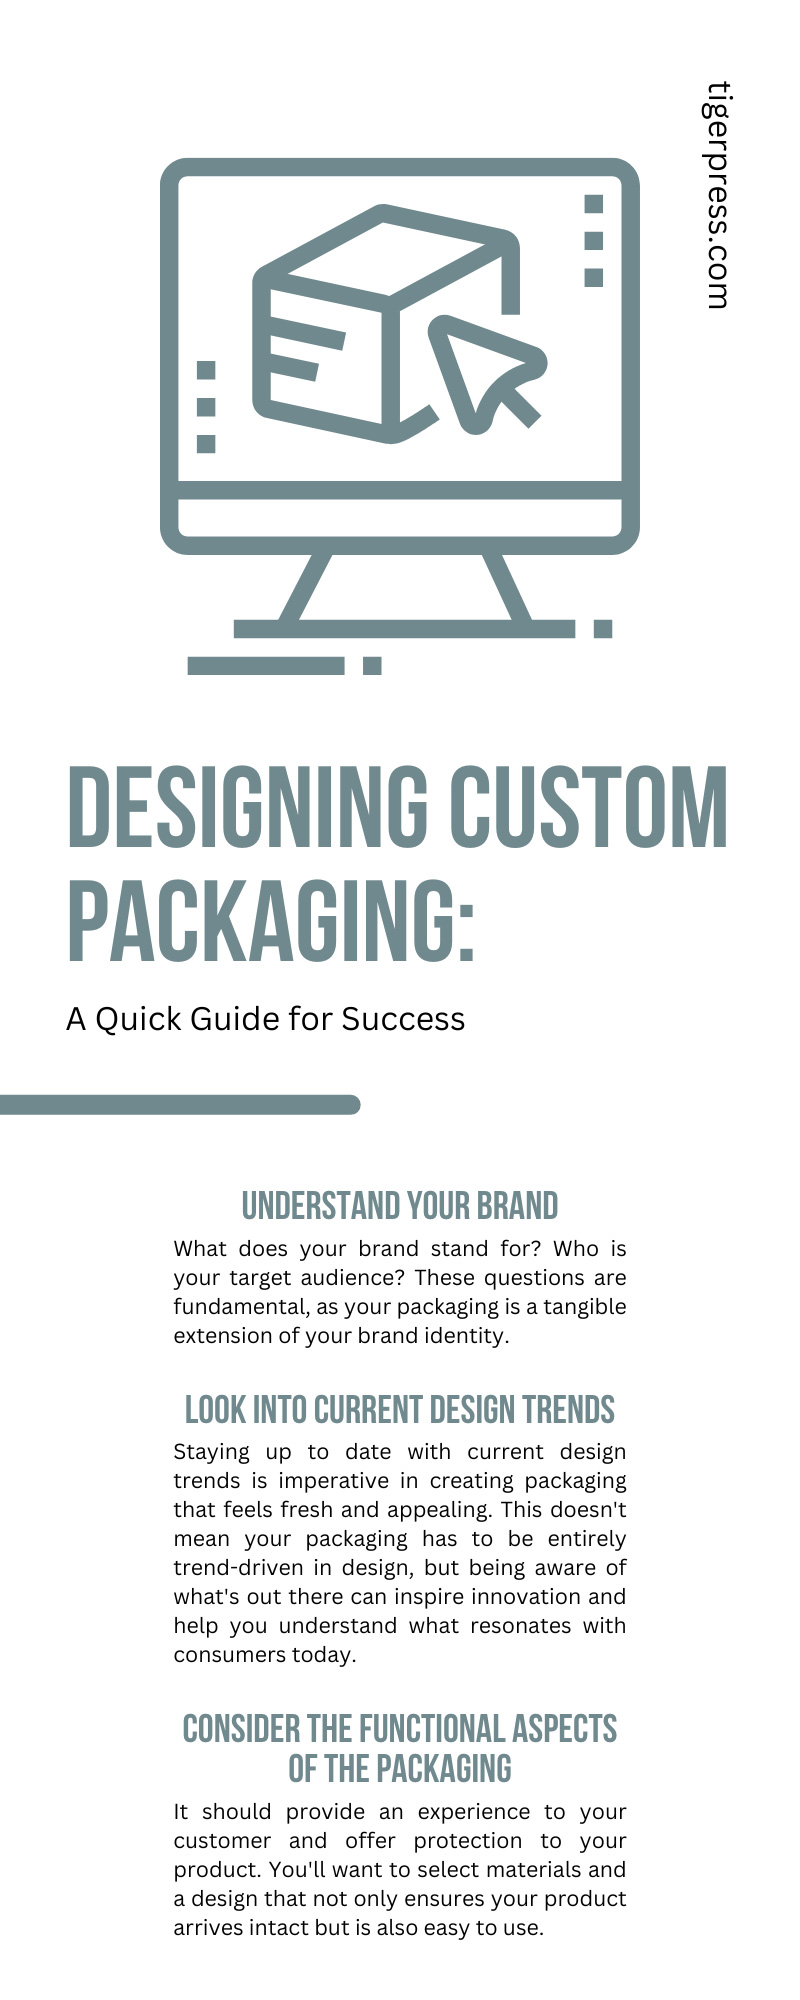 Designing Custom Packaging: A Quick Guide for Success